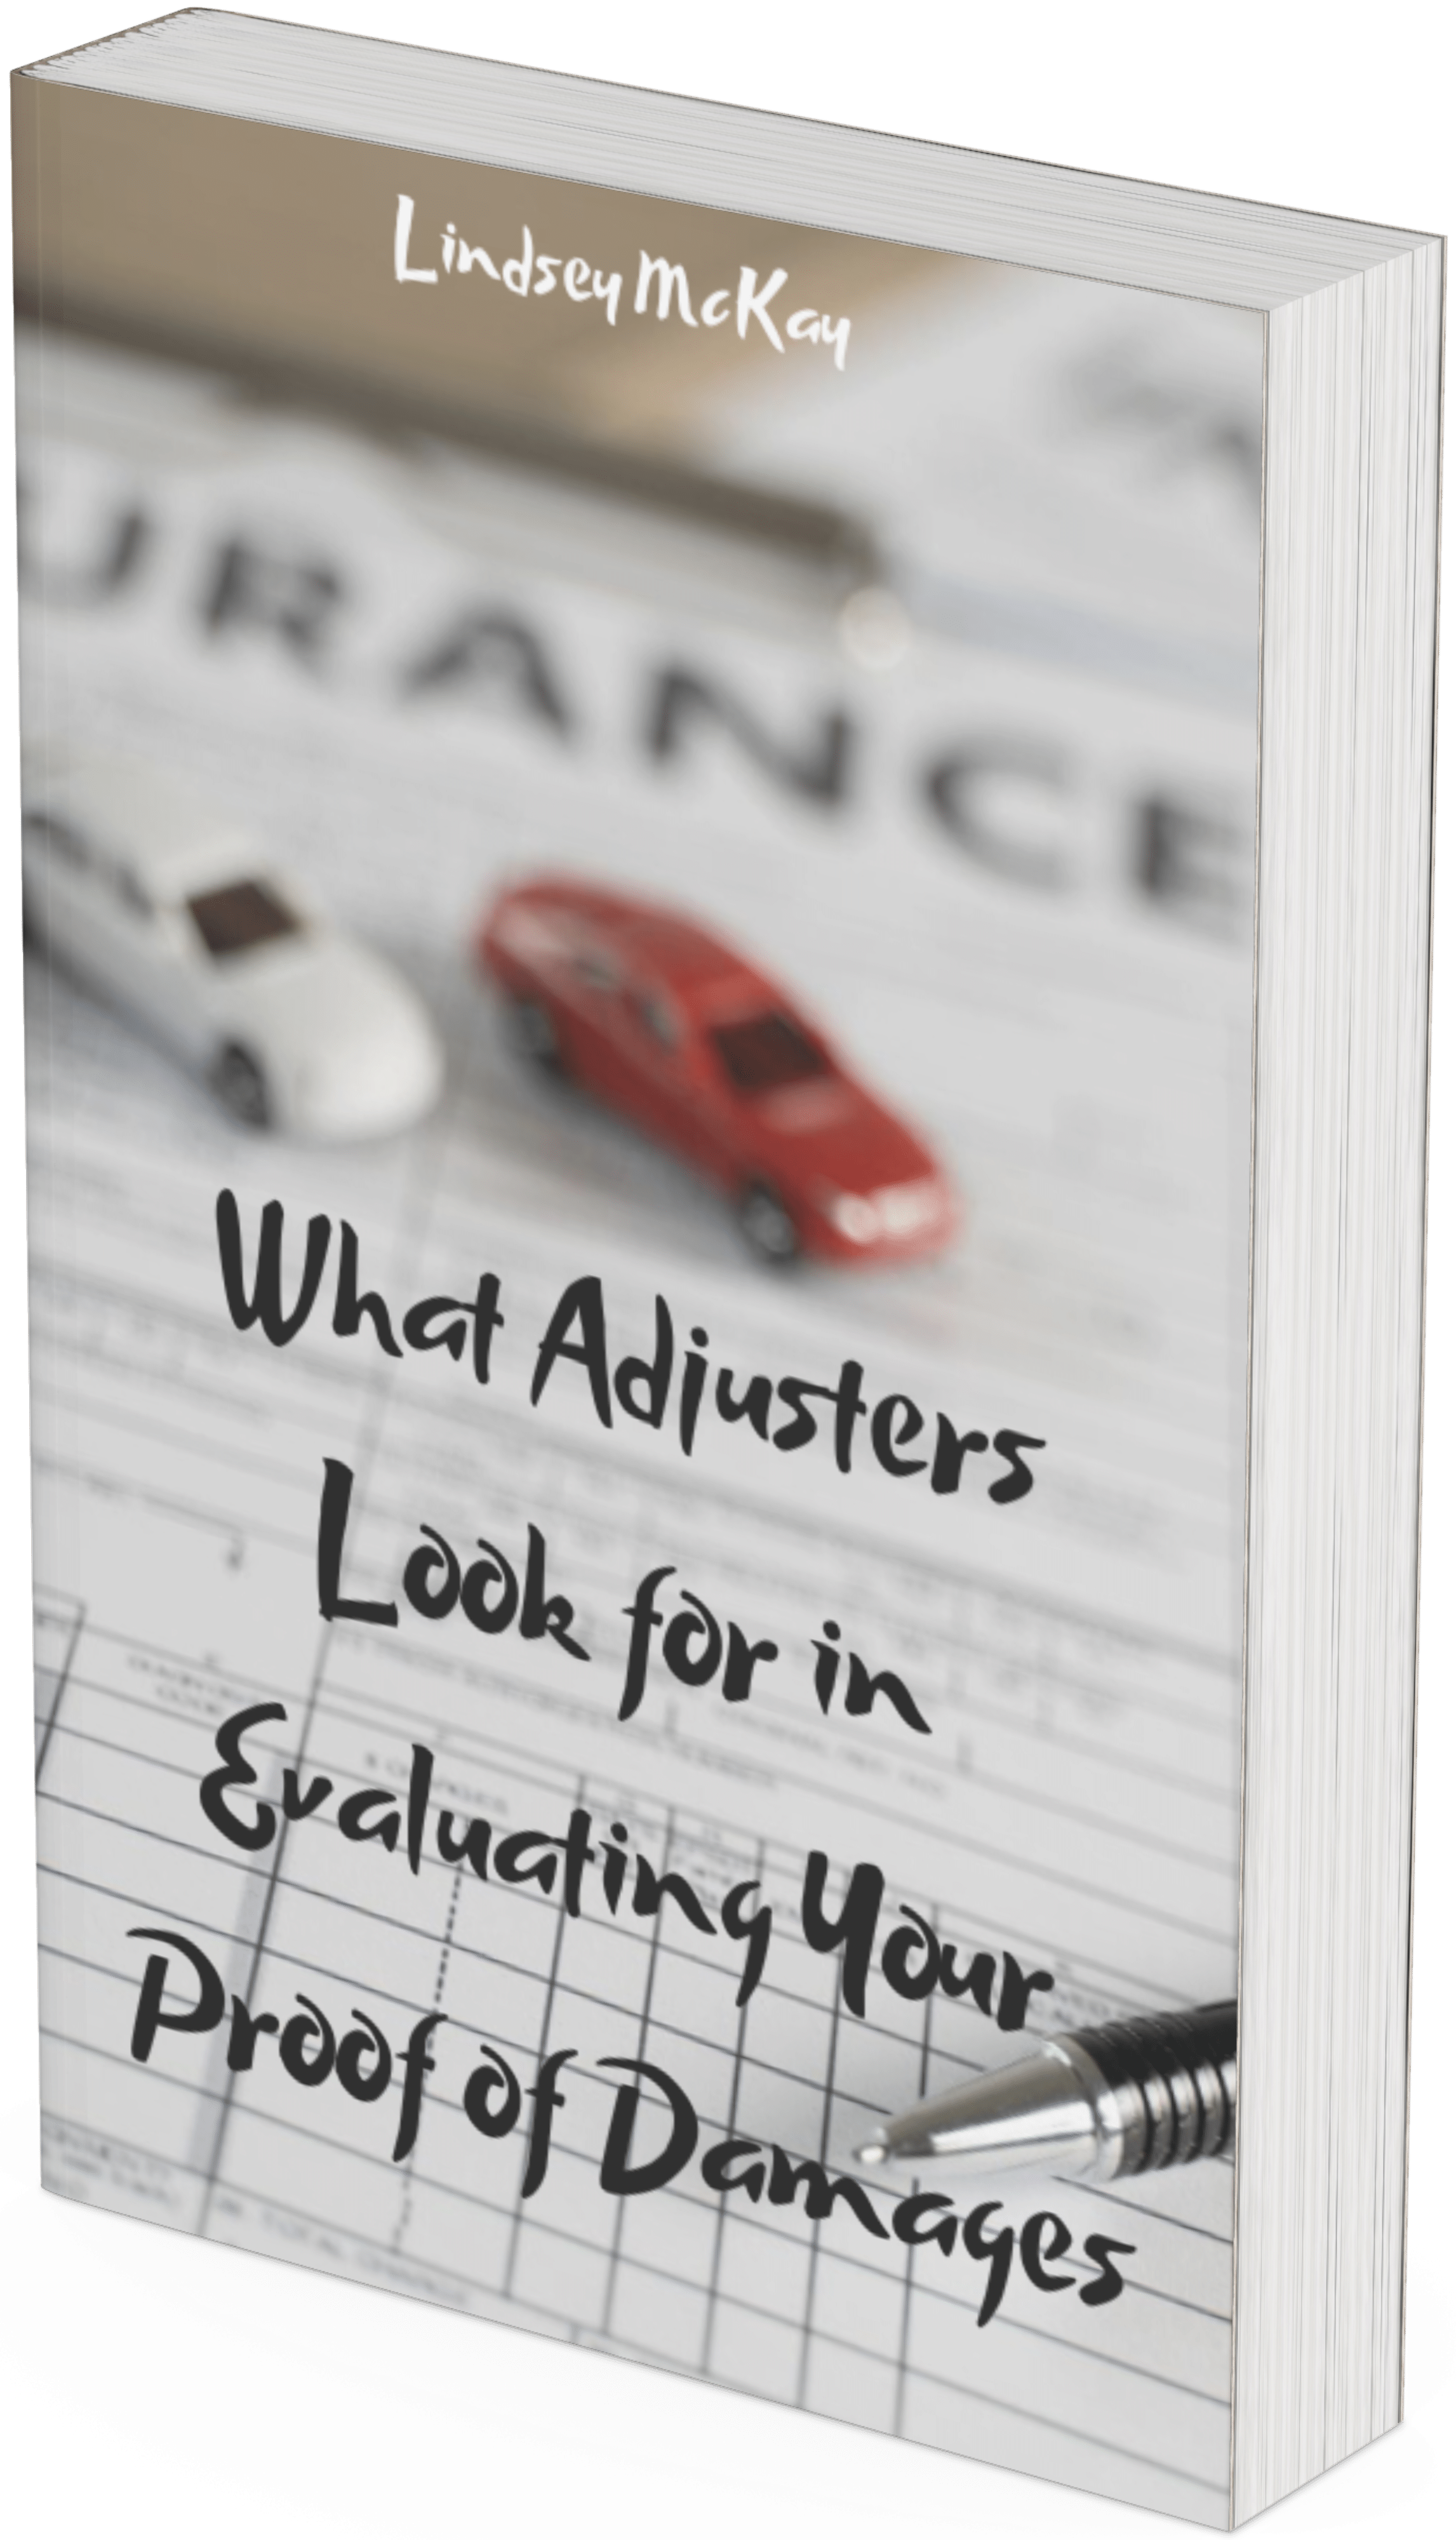 What Adjusters Look for in Evaluating Your Proof of Damages​